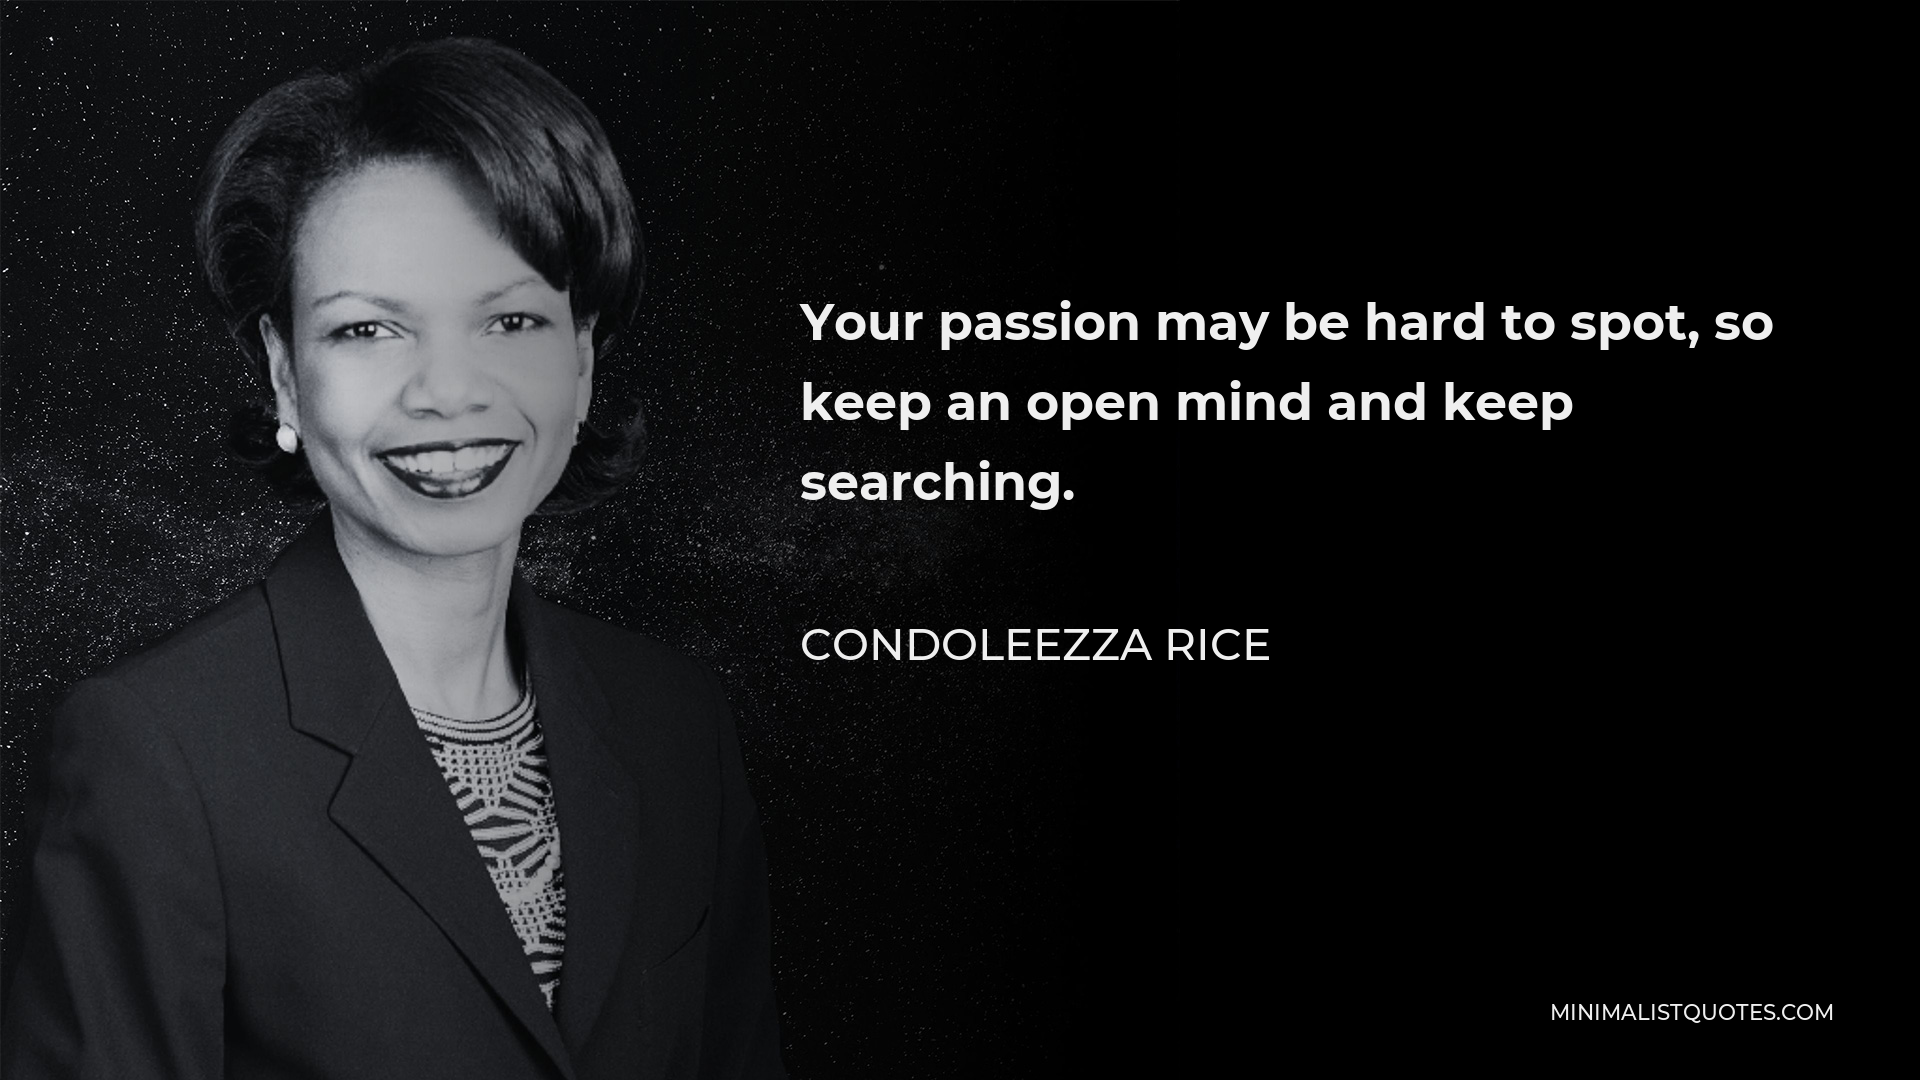 Condoleezza Rice Quote - Your passion may be hard to spot, so keep an open mind and keep searching.